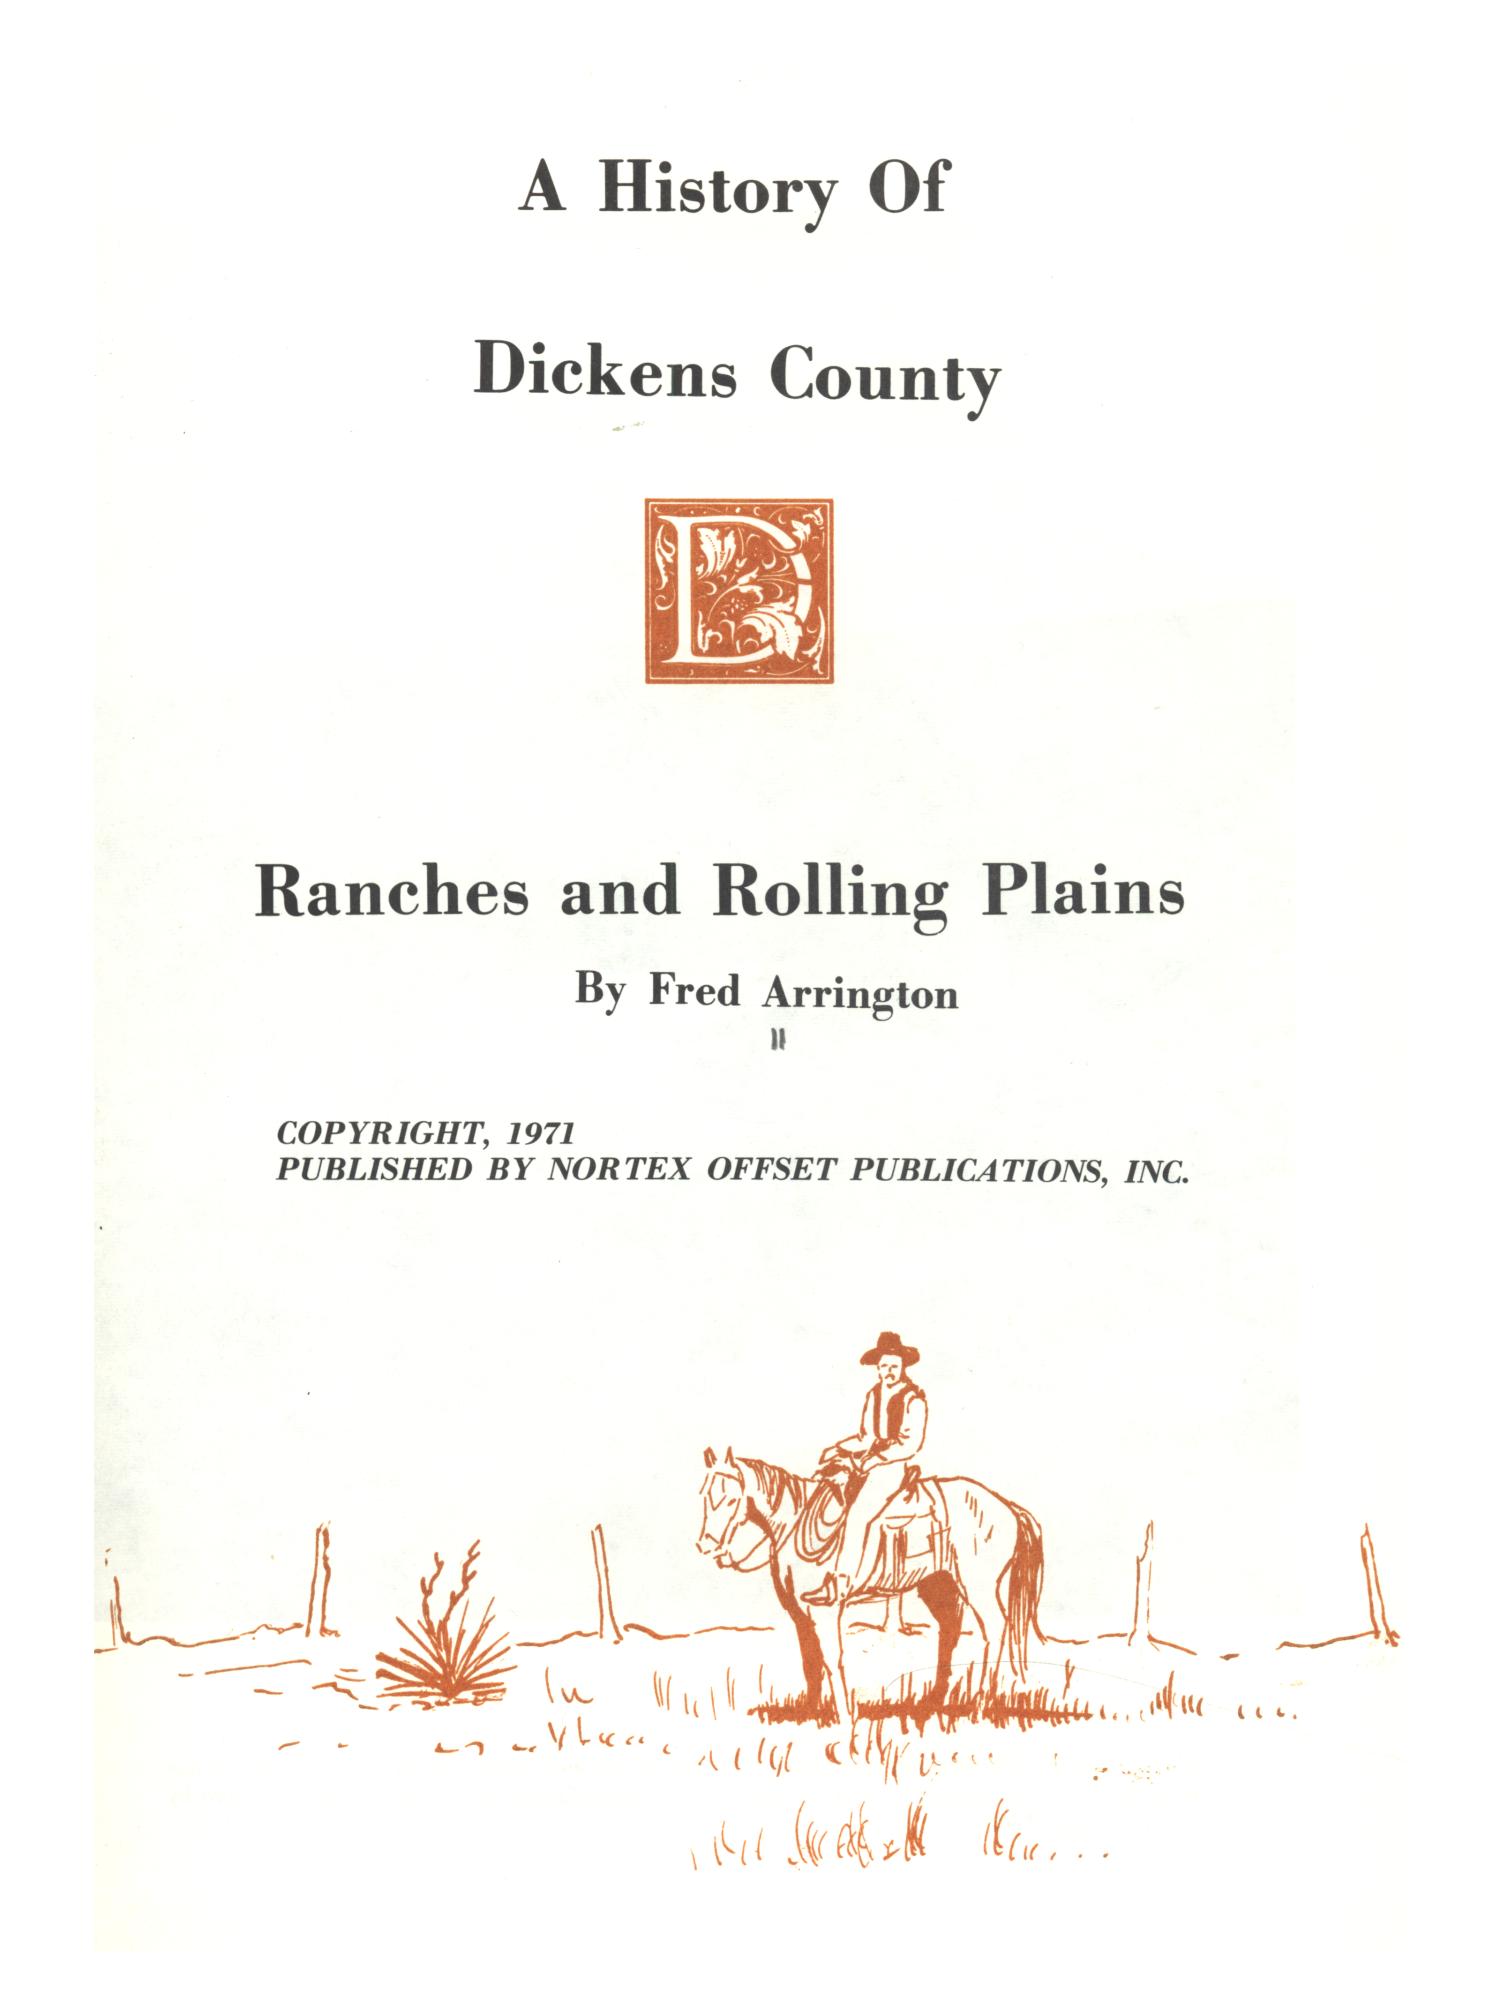 A History Of Dickens County: Ranches and Rolling Plains
                                                
                                                    None
                                                